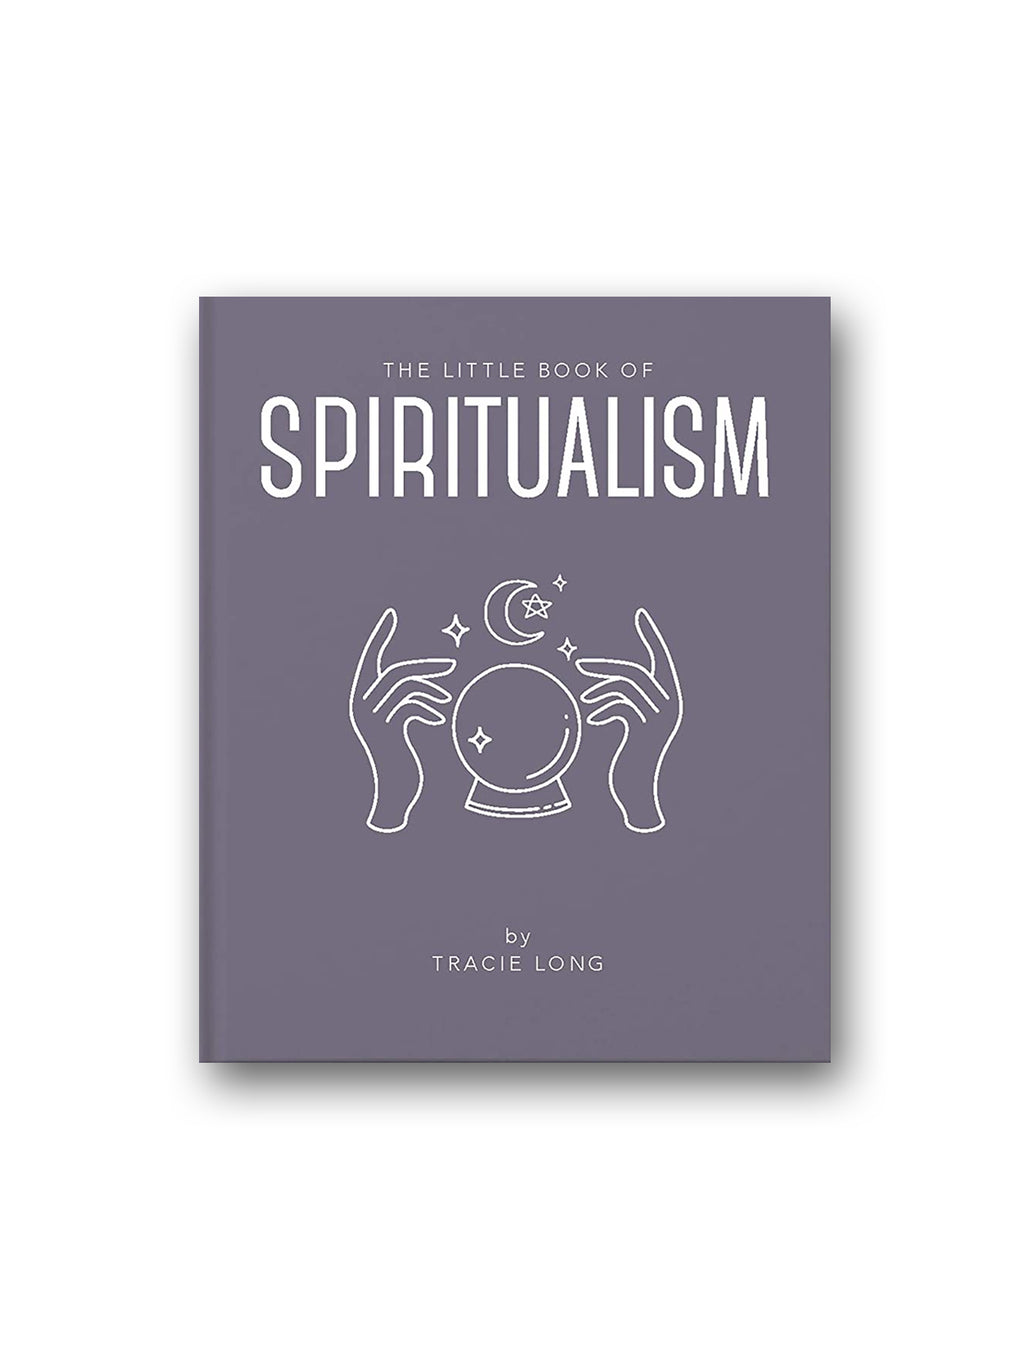 The Little Book of Spiritualism